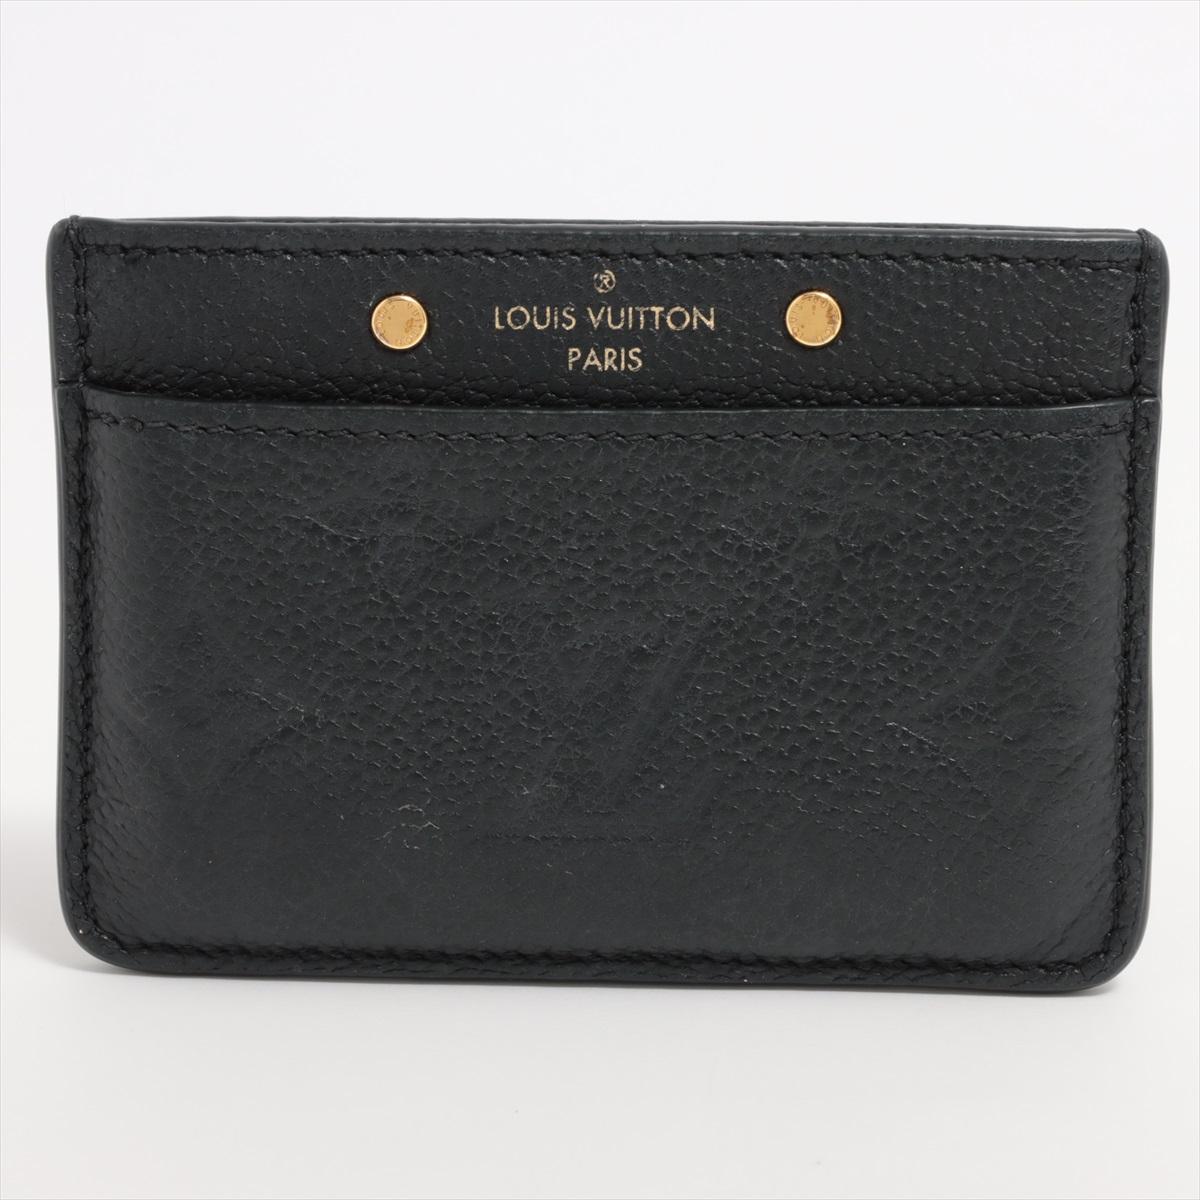 The Louis Vuitton Monogram Empreinte Card Case in Black a sleek and refined accessory that seamlessly blends sophistication with functionality. Crafted from Louis Vuitton's exquisite Empreinte leather, the card case features a luxuriously textured